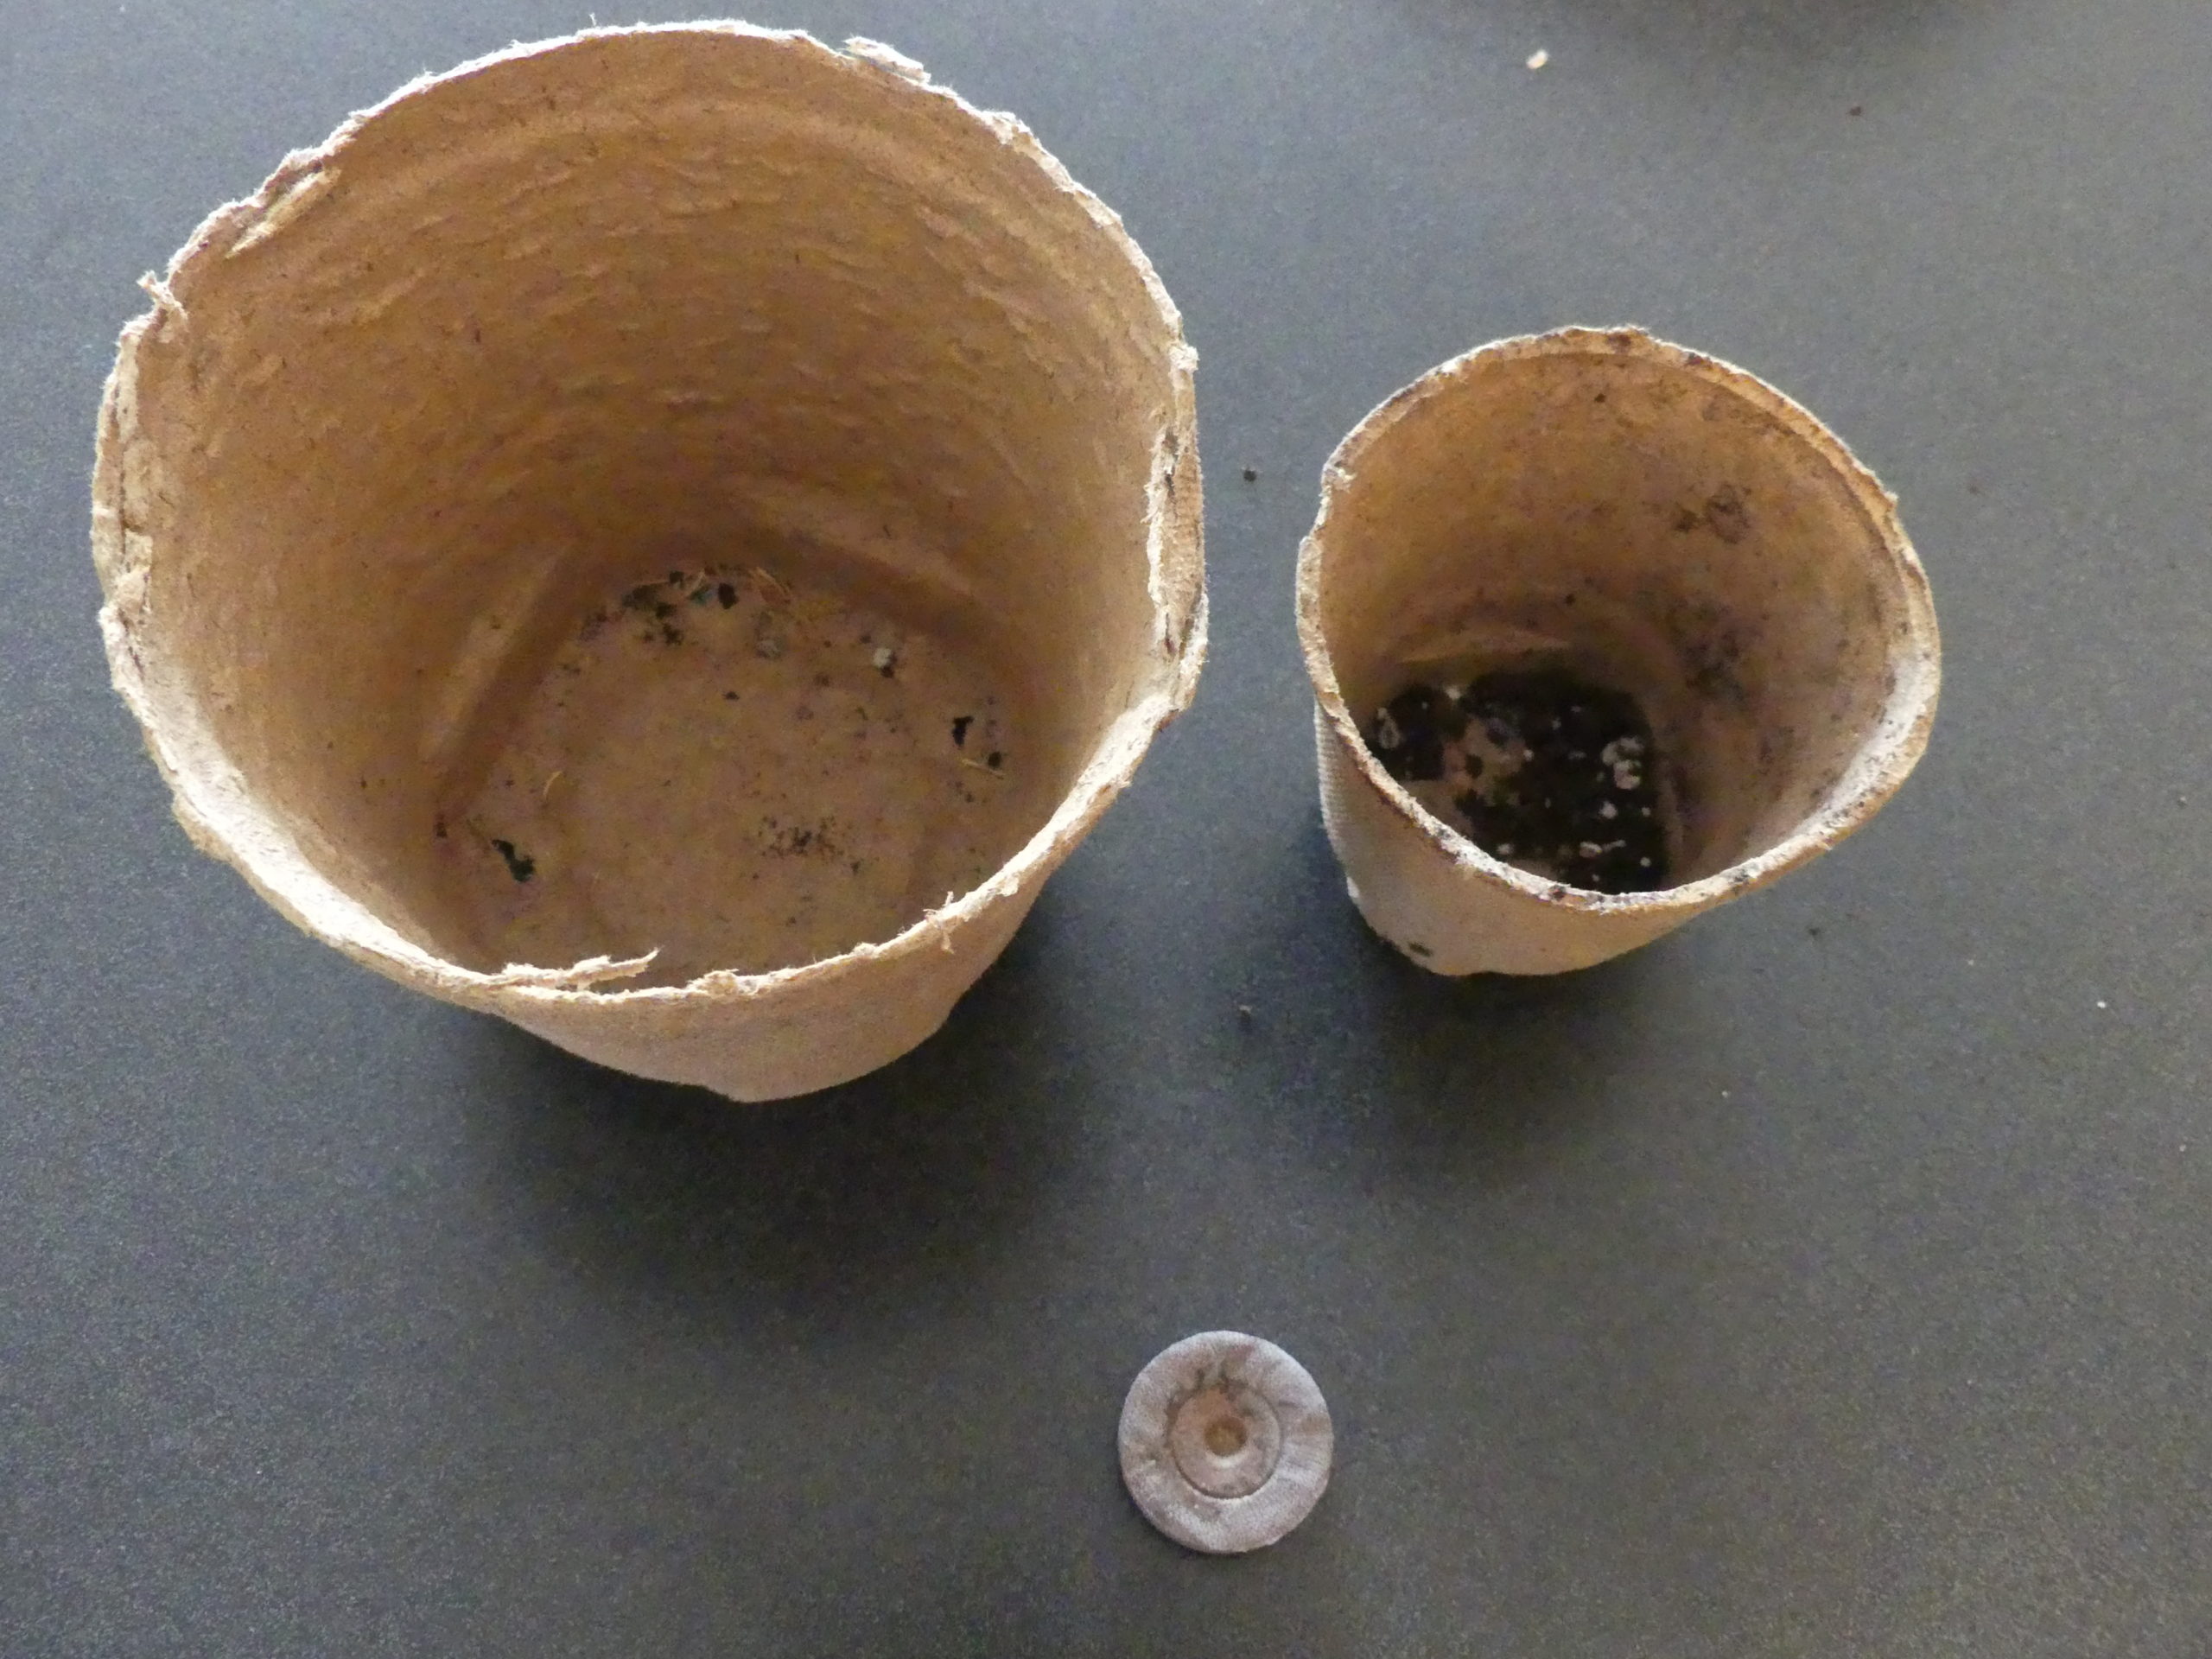 Peat pots and pellets from Jiffy offer convenient ways of starting vegetable plants at home them planting them directly into the garden pot and all with no transplant damage. Left is a 6-inch peat pot, right, a 4-inch, and bottom is a compressed Jiffy pellet that just needs water to expand for seeding. ANDREW MESSINGER